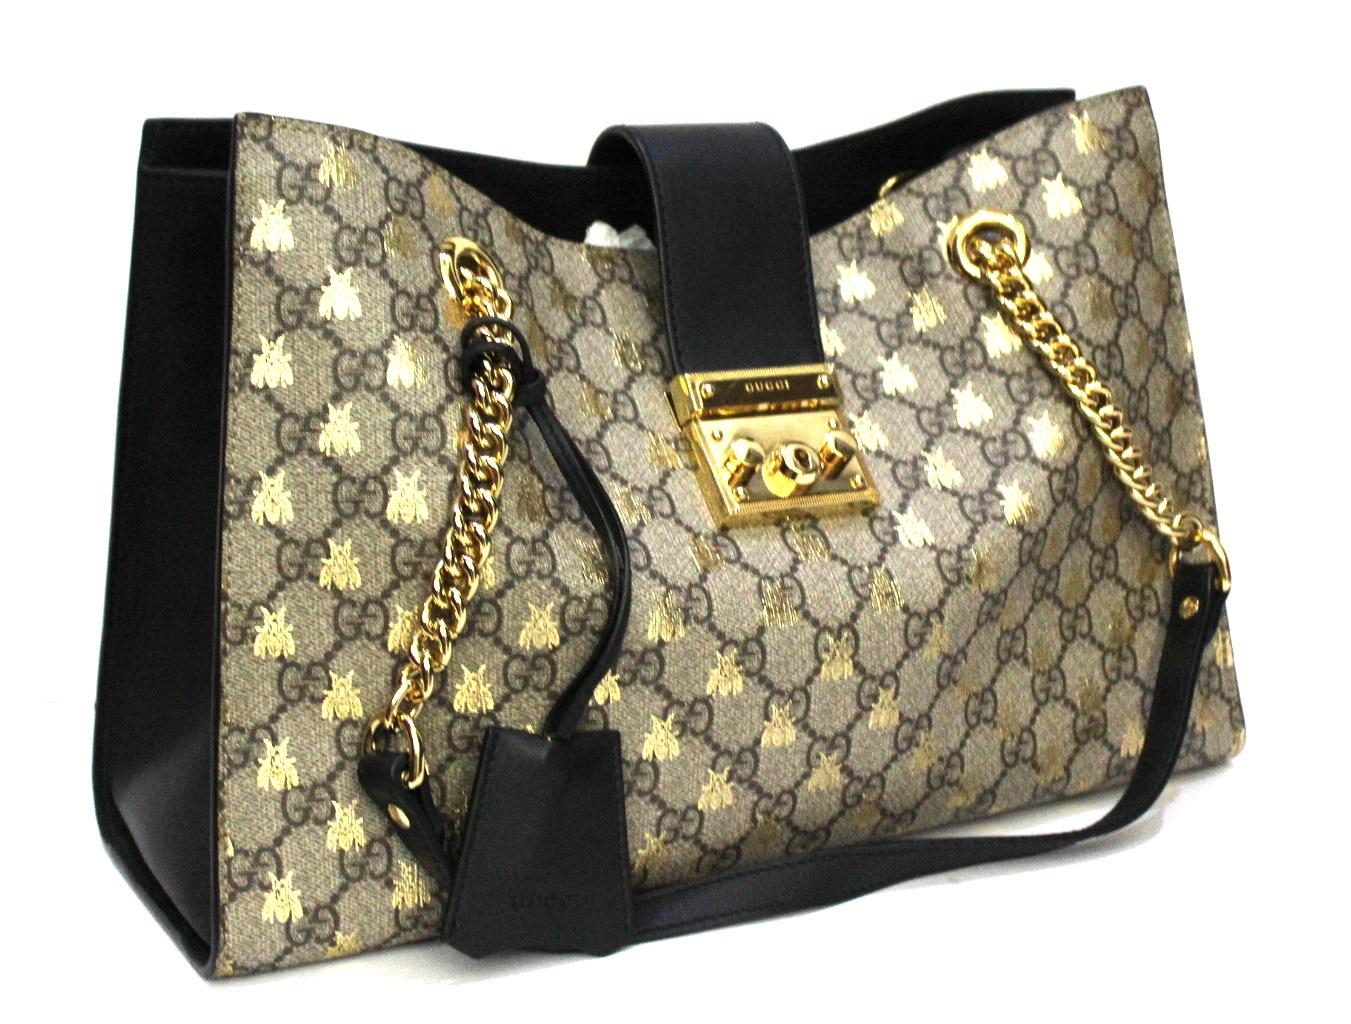 Padlock model Gucci bag made of GG supreme canvas and black leather with golden hardware.
Equipped with double leather handle and chain. Hook closure, very large inside.
The bag is in excellent condition.